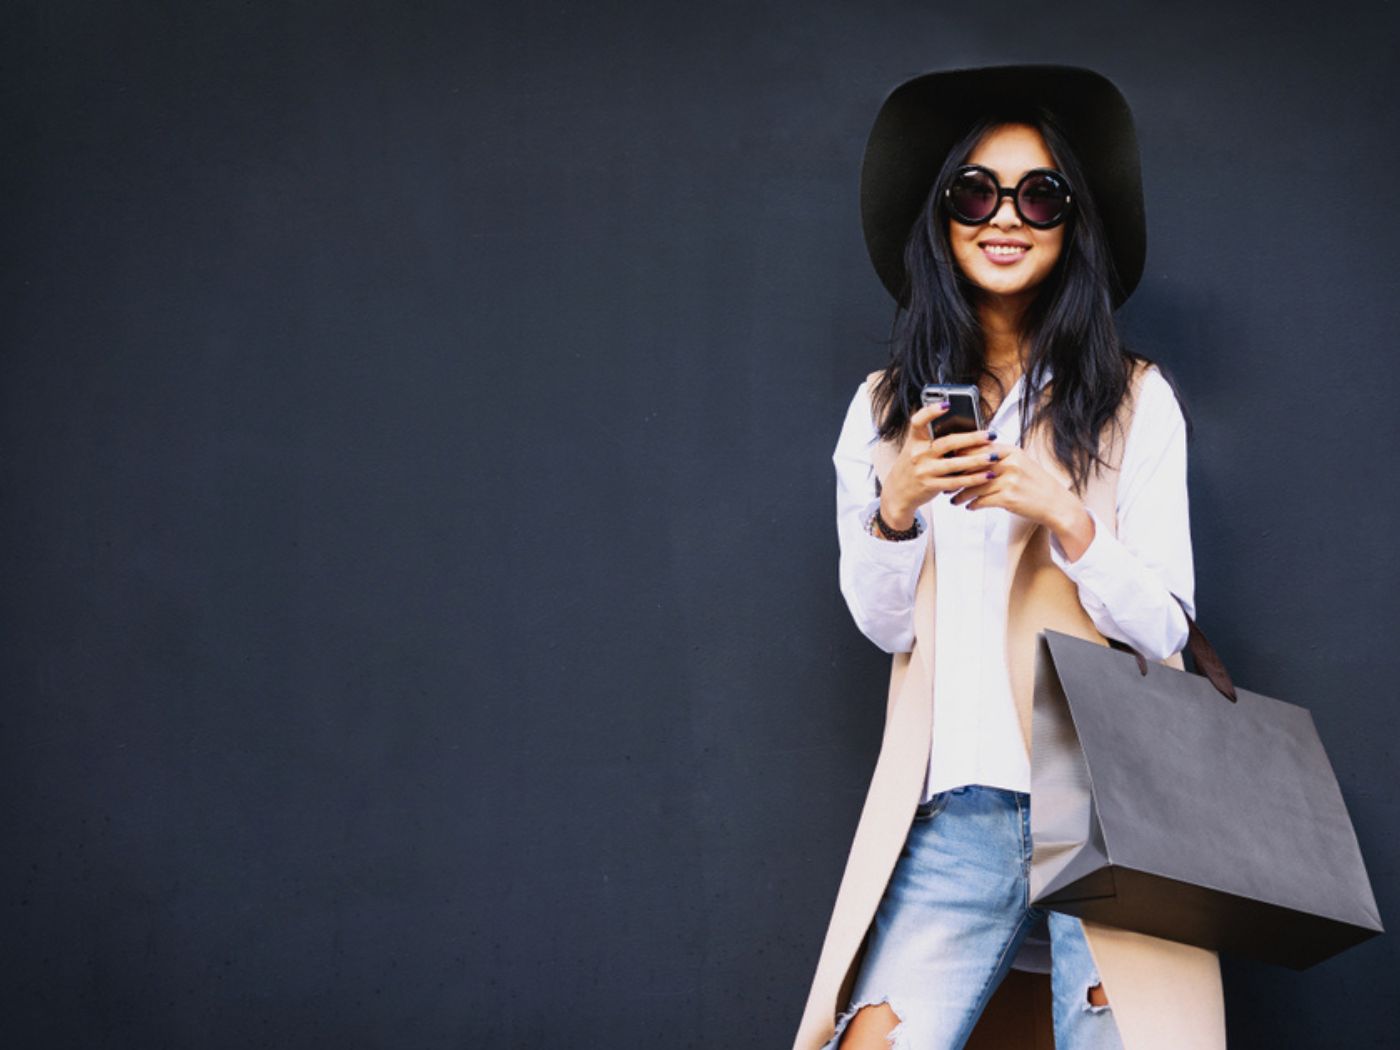 Woman with dark hair and a large hat with sunglasses carries her phone and a shopping bag